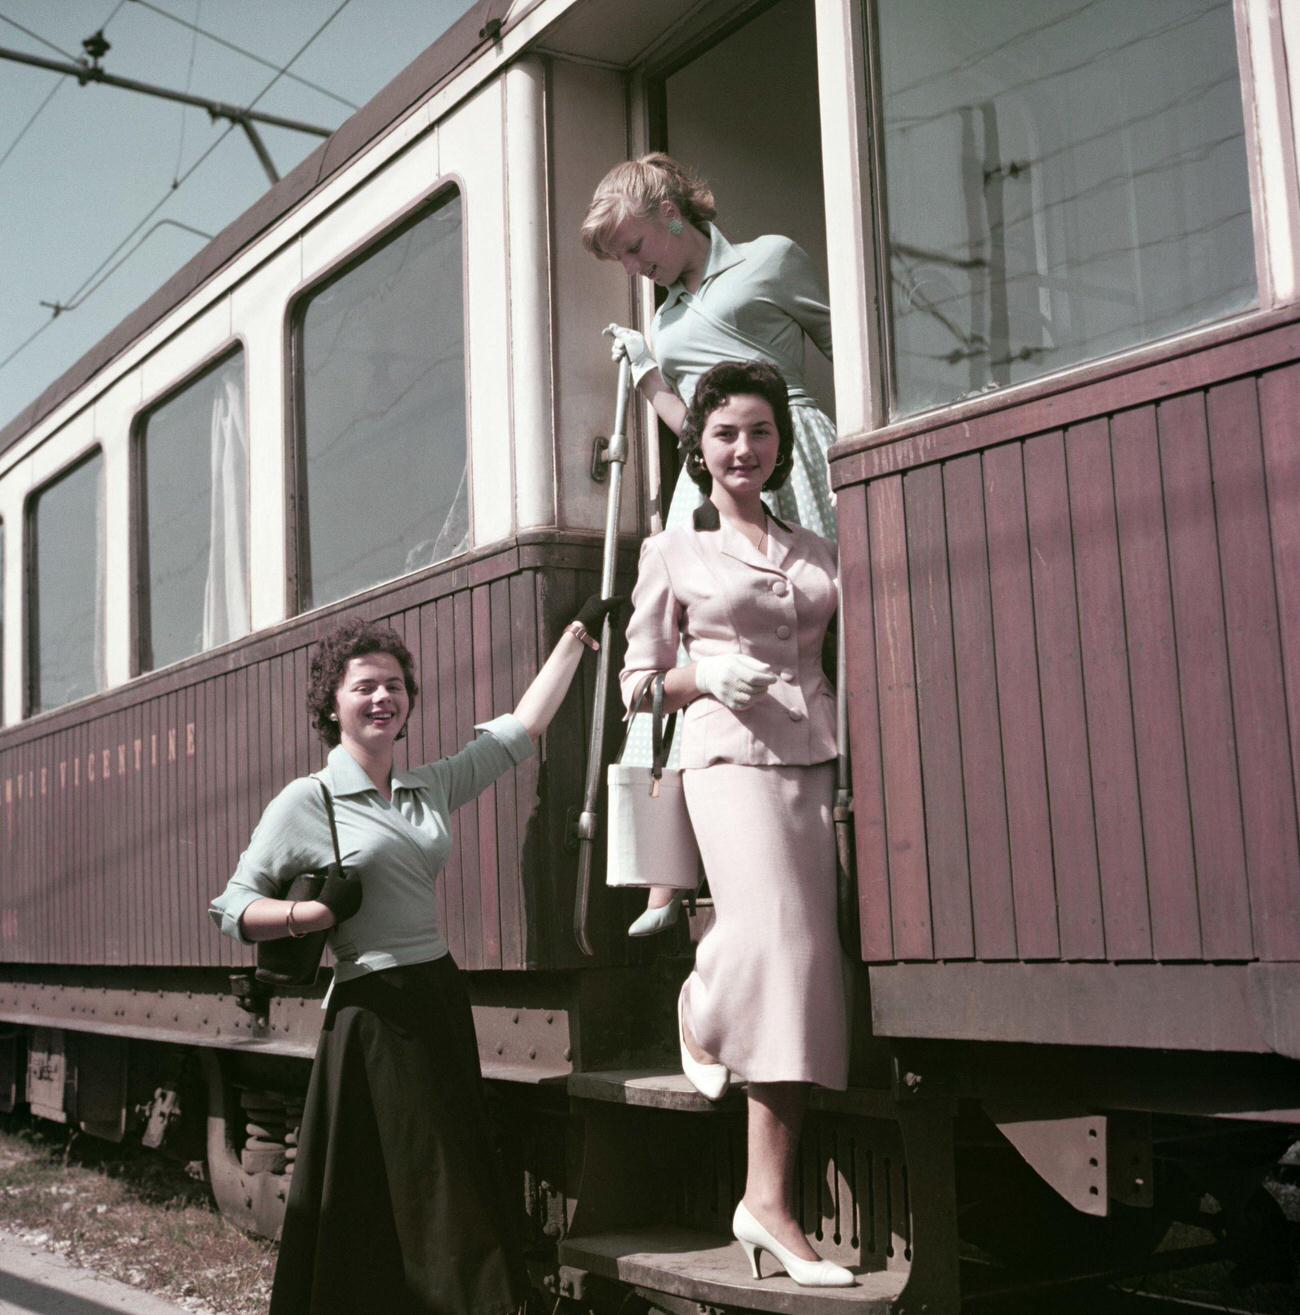 Three women getting off the train at the station. Italy, 1955